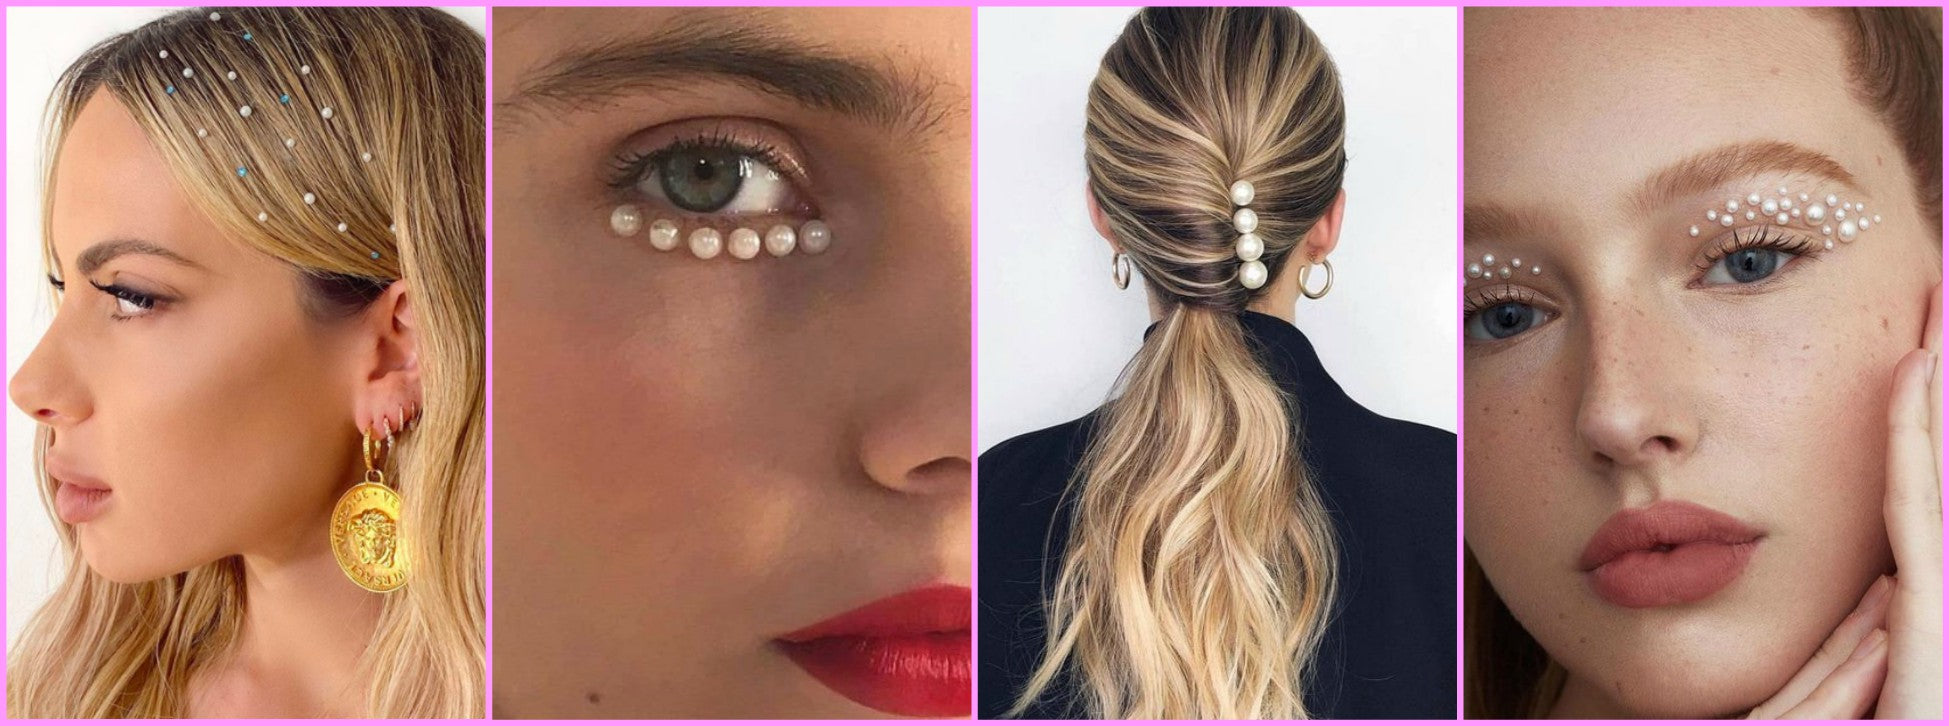 Trend Alert: Pearls For Hair And Makeup! – Wicked Roots Hair™